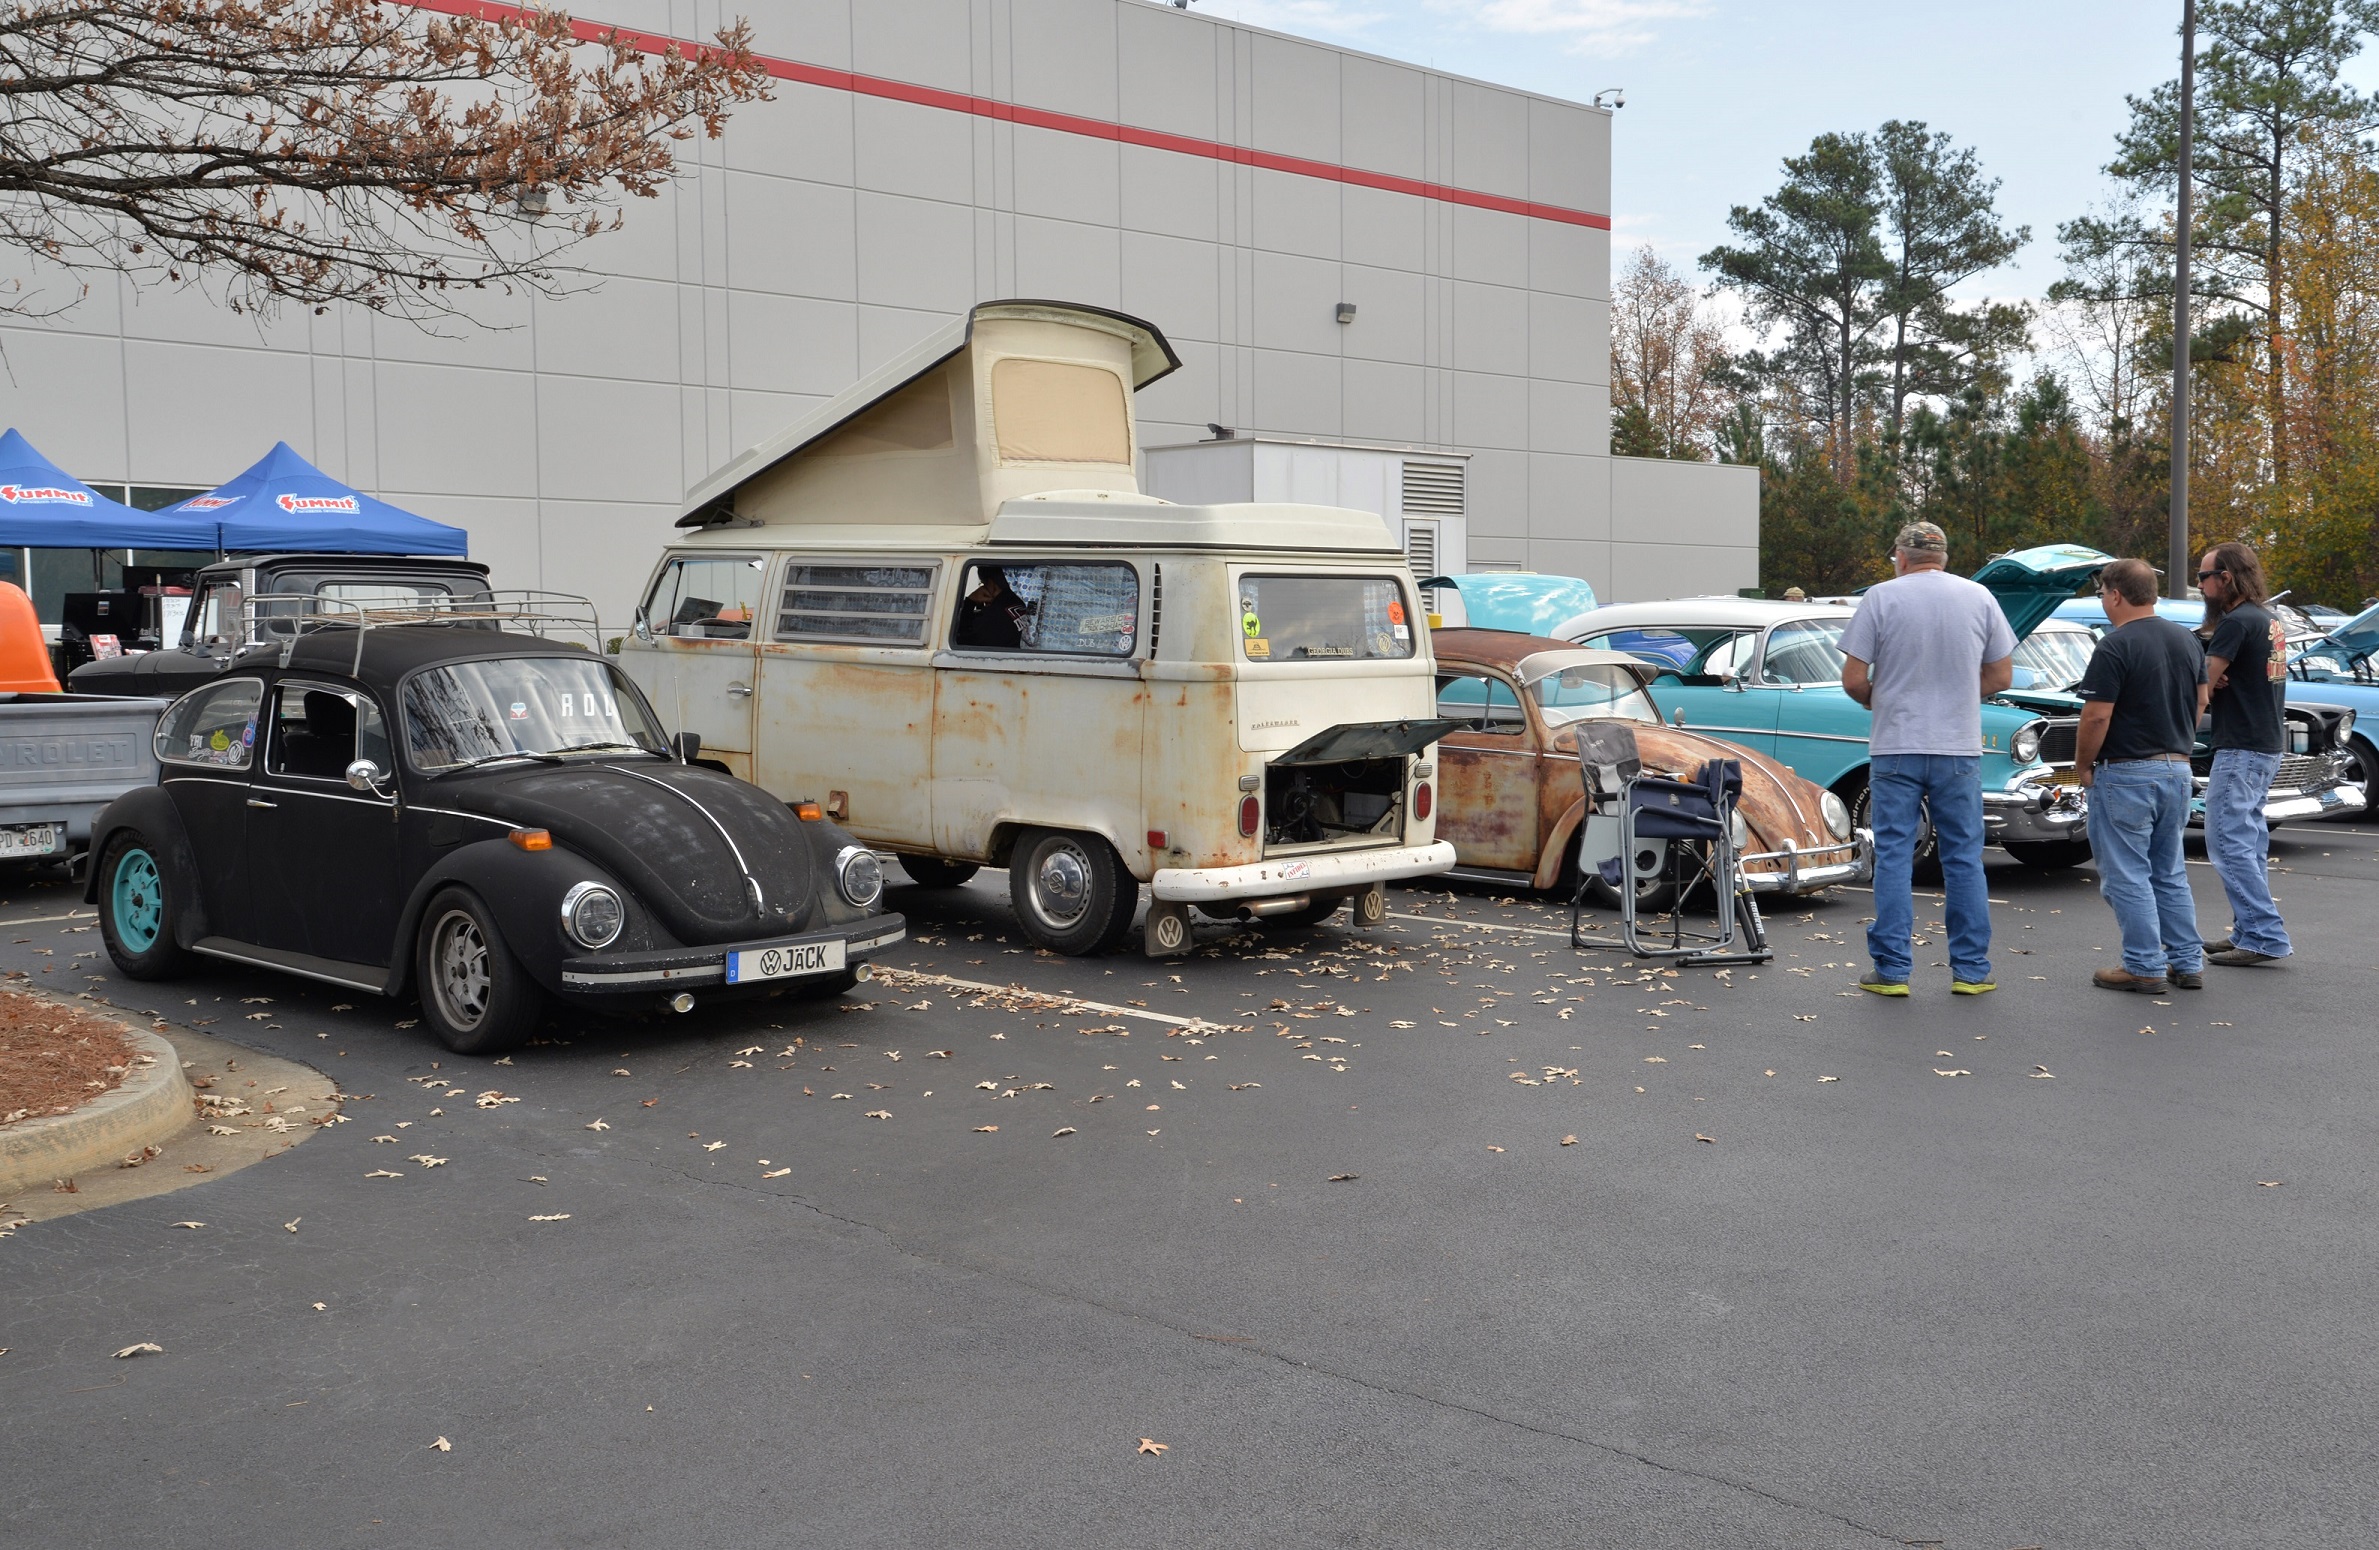 Toys for Tots Cruise In Volkswagens